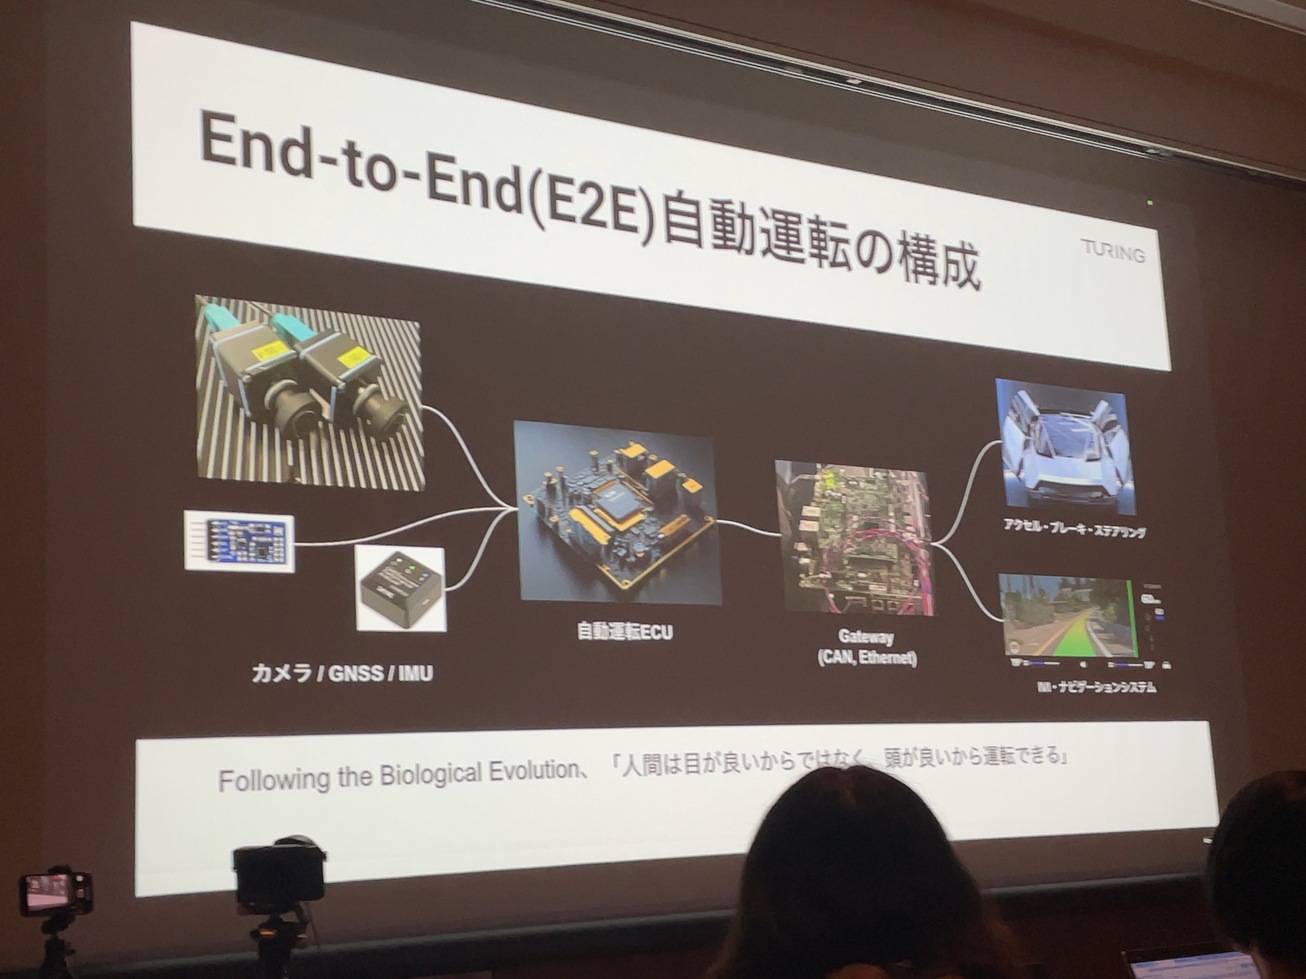 End-to-Endな自動運転の構成